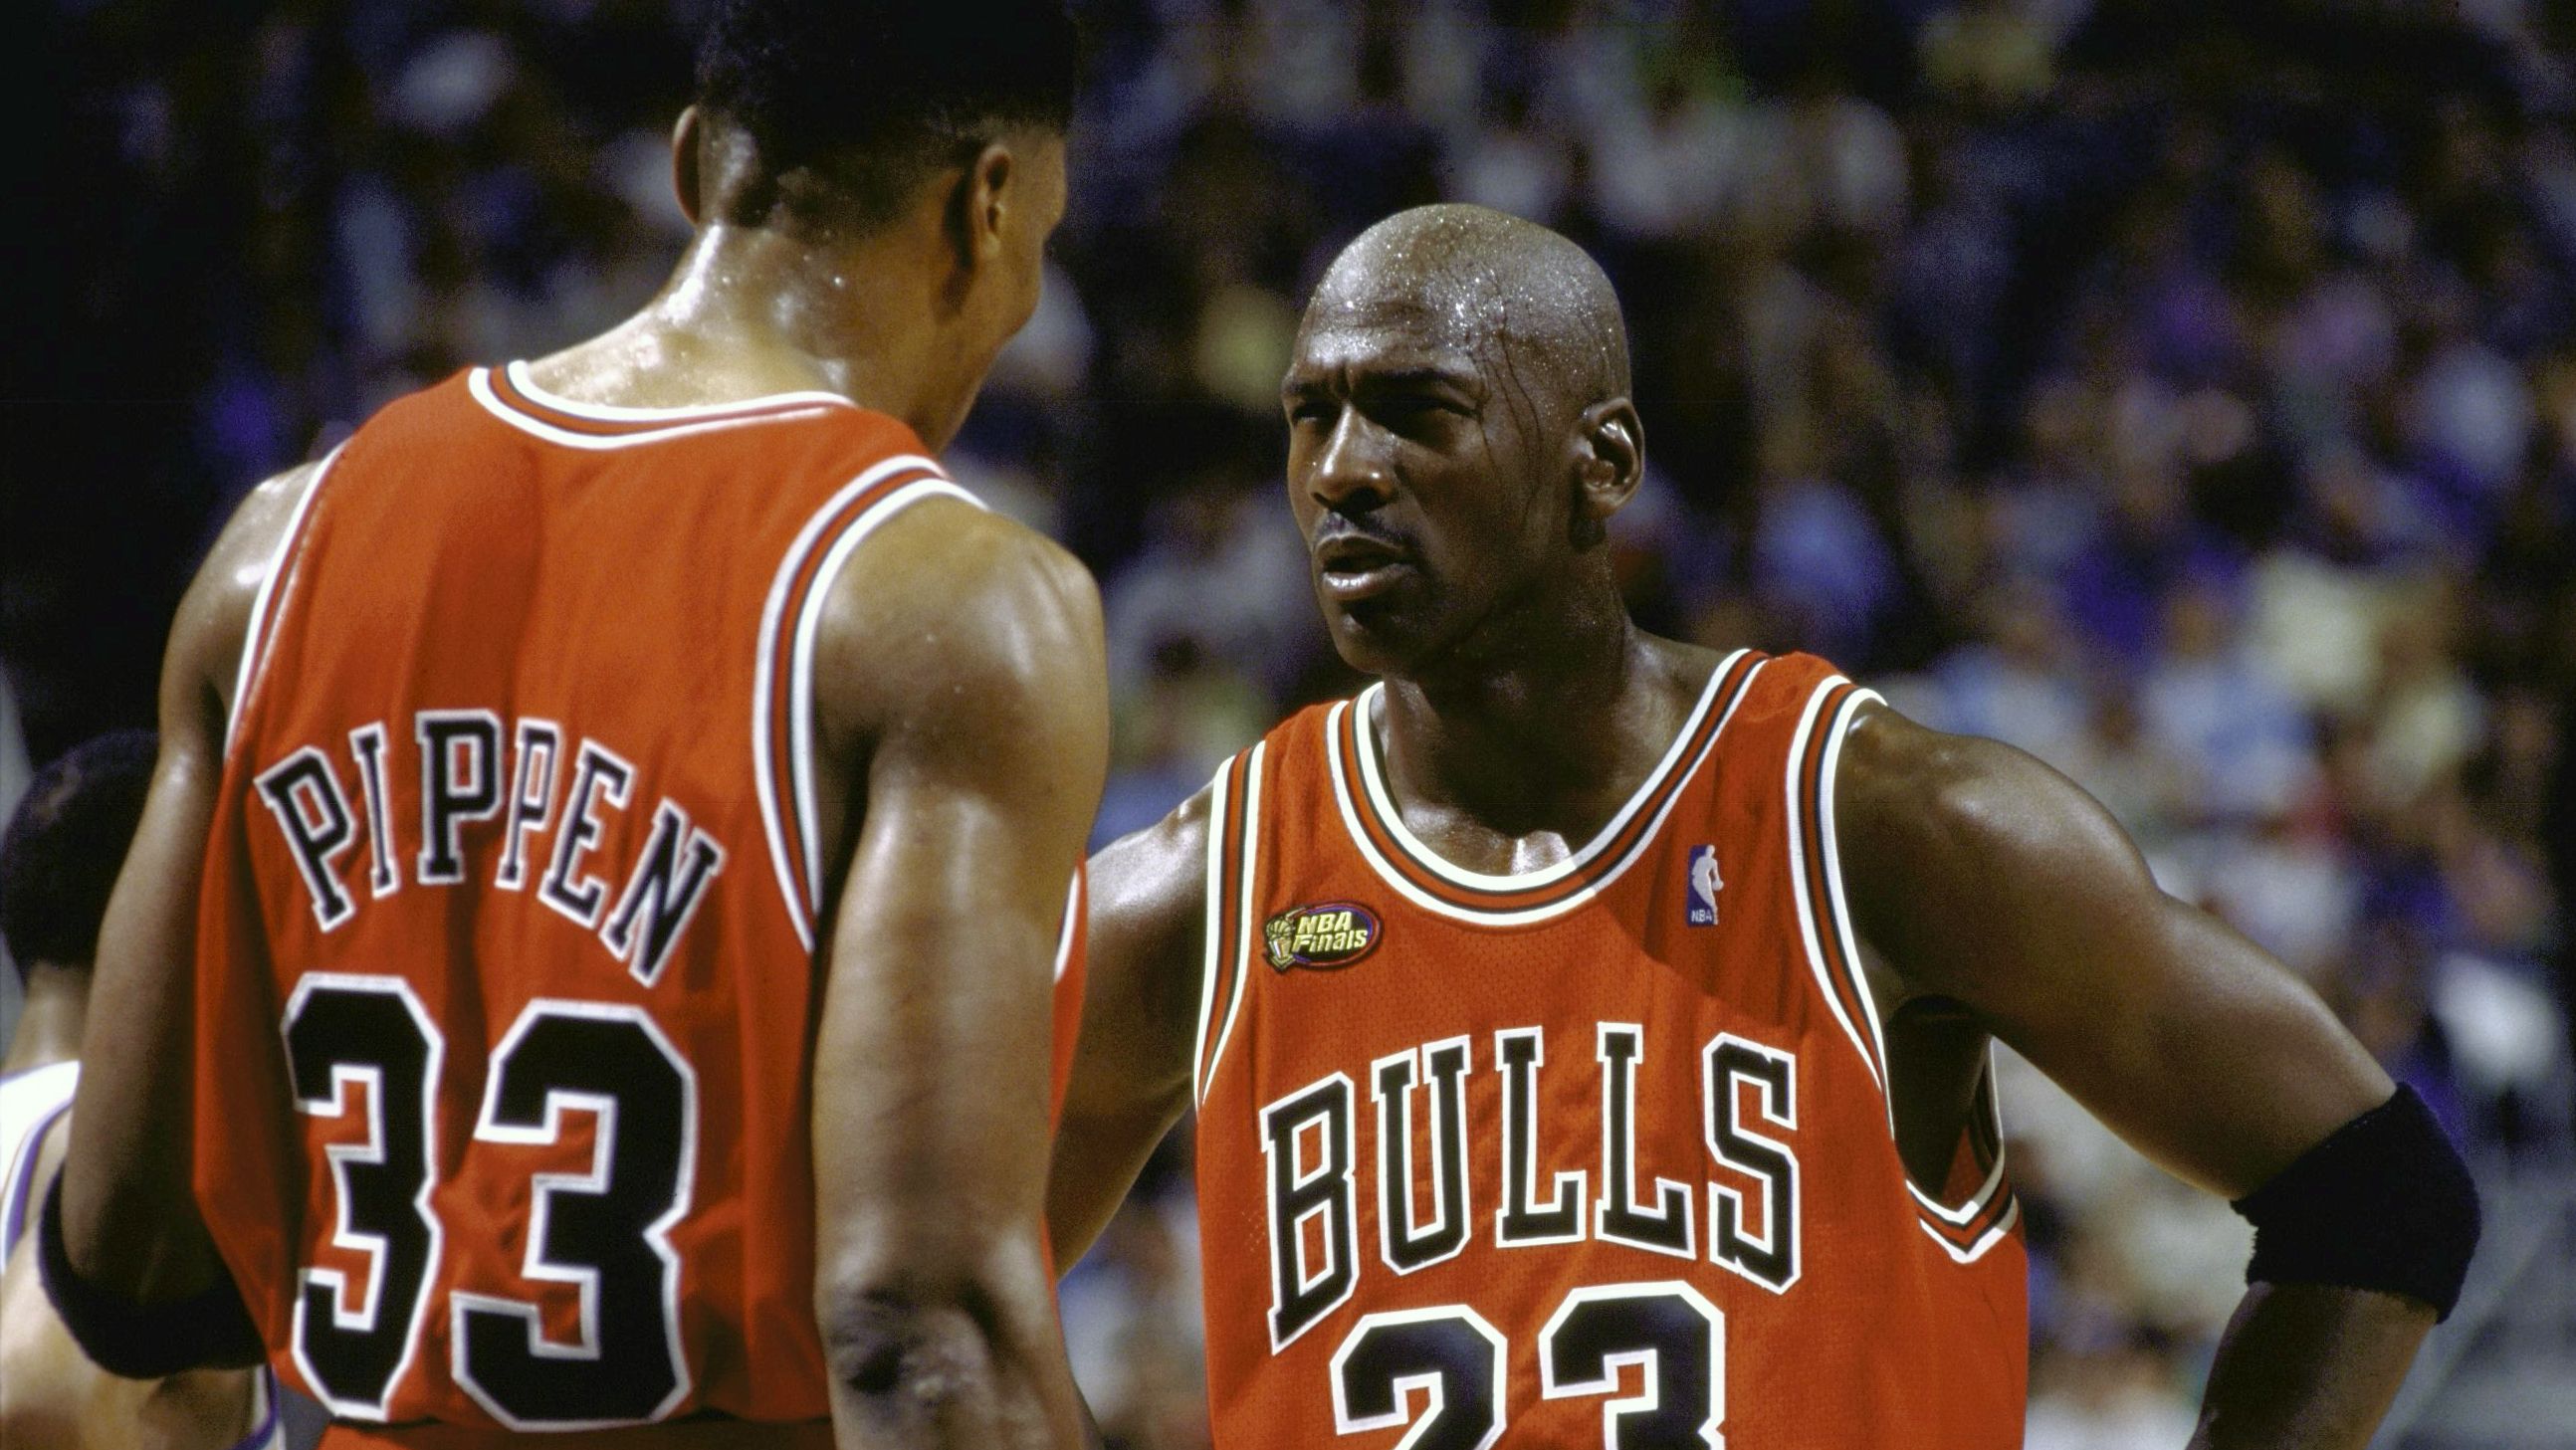 Used 12/13/1999 Basketball: NBA Finals: Chicago Bulls Michael Jordan (23) with Scottie Pippen (33) on court during Game 1 vs Utah Jazz at Delta Center. Salt Lake City, UT 6/3/1998 CREDIT: John W. McDonough (Photo by John W. McDonough /Sports Illustrated/Getty Images) (Set Number: X55711 )